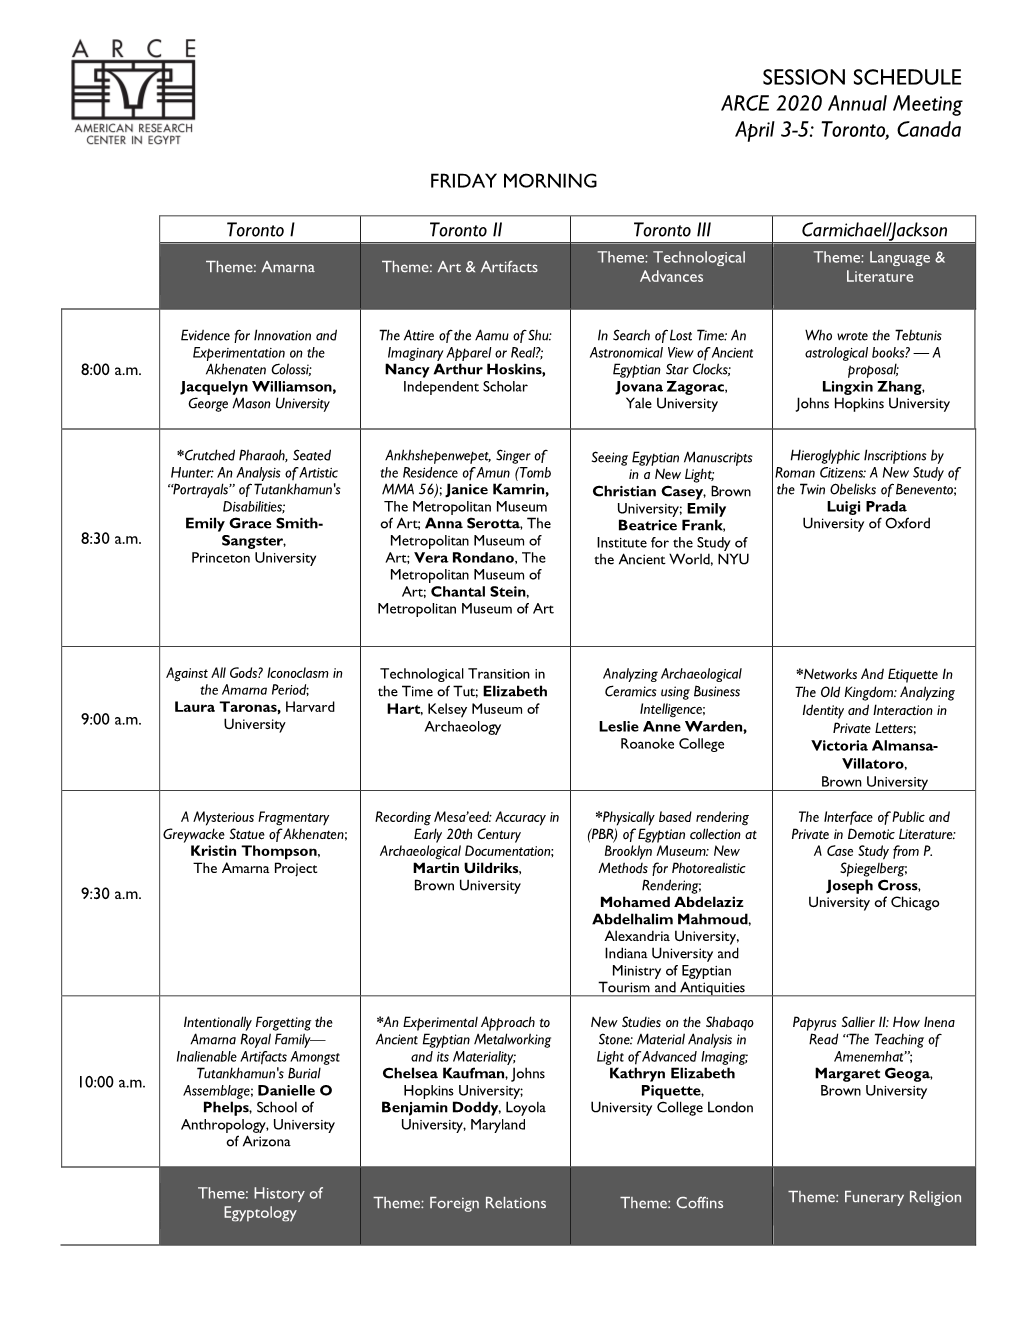 SESSION SCHEDULE ARCE 2020 Annual Meeting April 3-5: Toronto, Canada